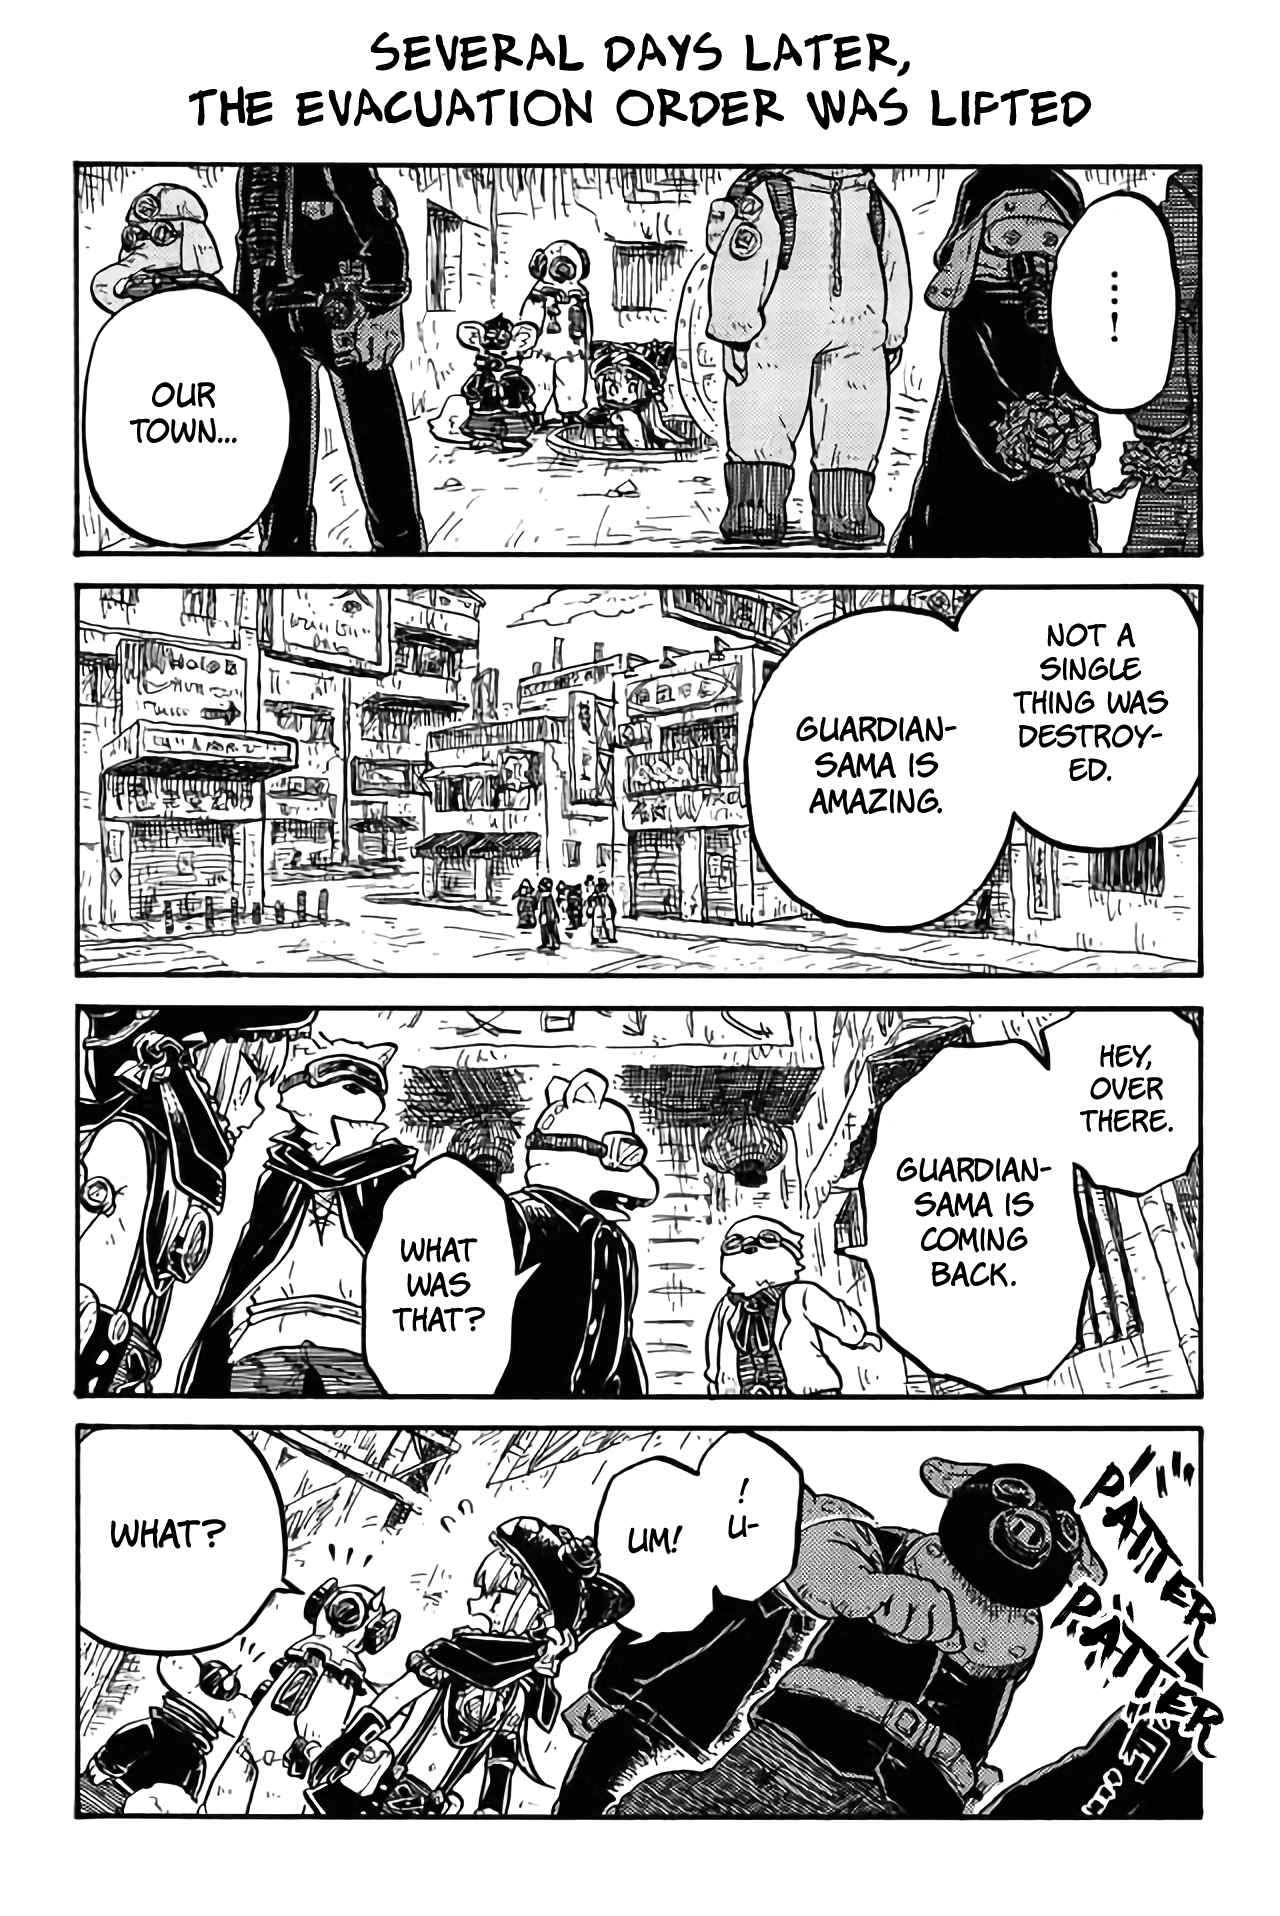 Taihai no Hanauri Ch. 114 Several Days Later, The Evacuation Order was Lifted